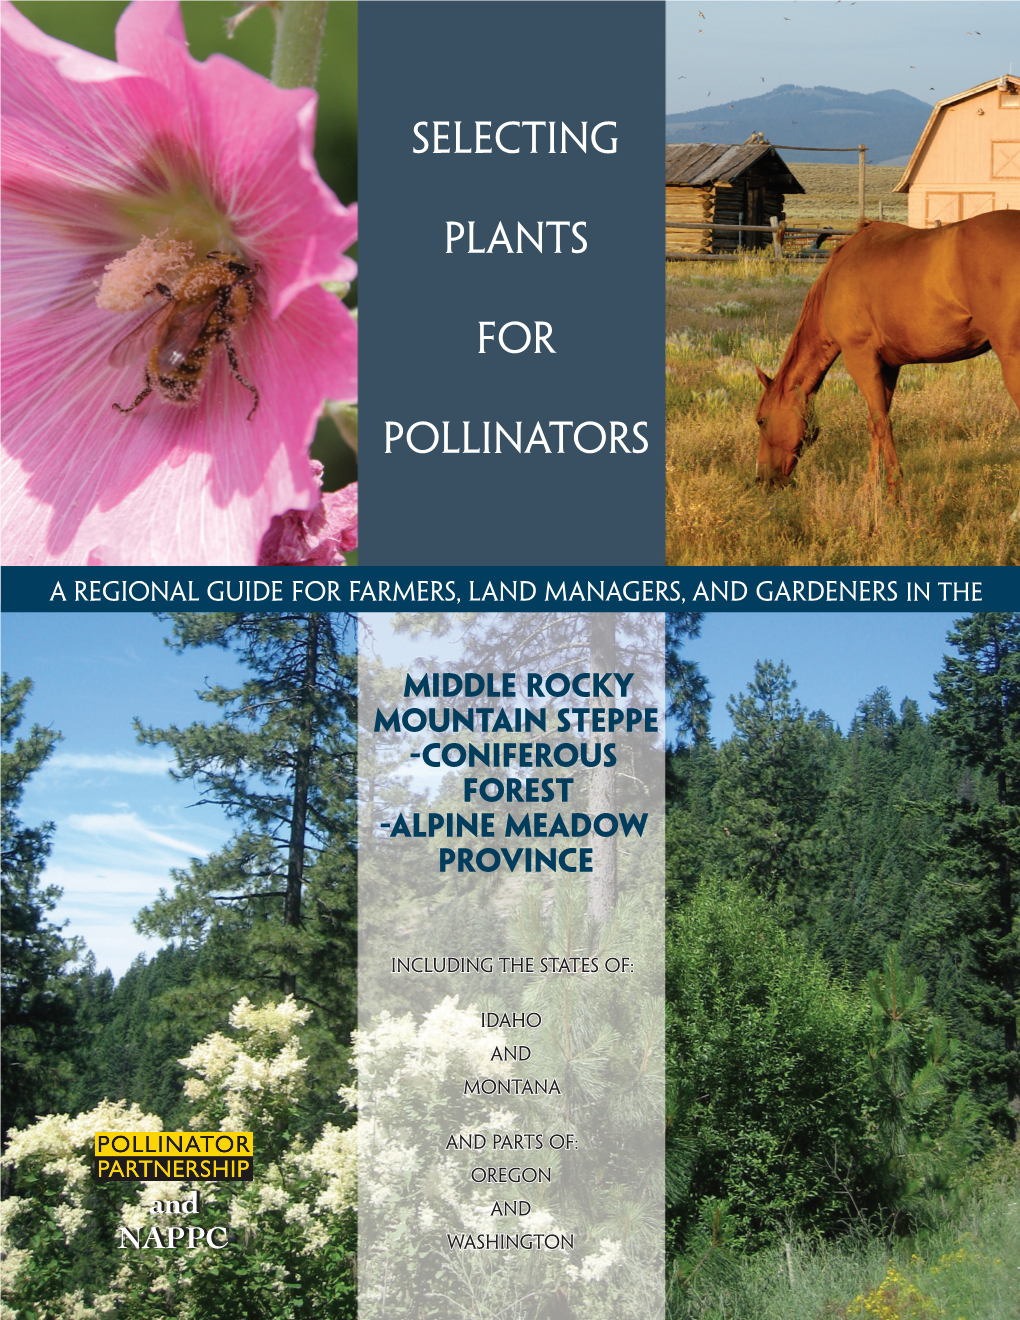 Guide for Farmers, Land Managers, and Gardeners in The